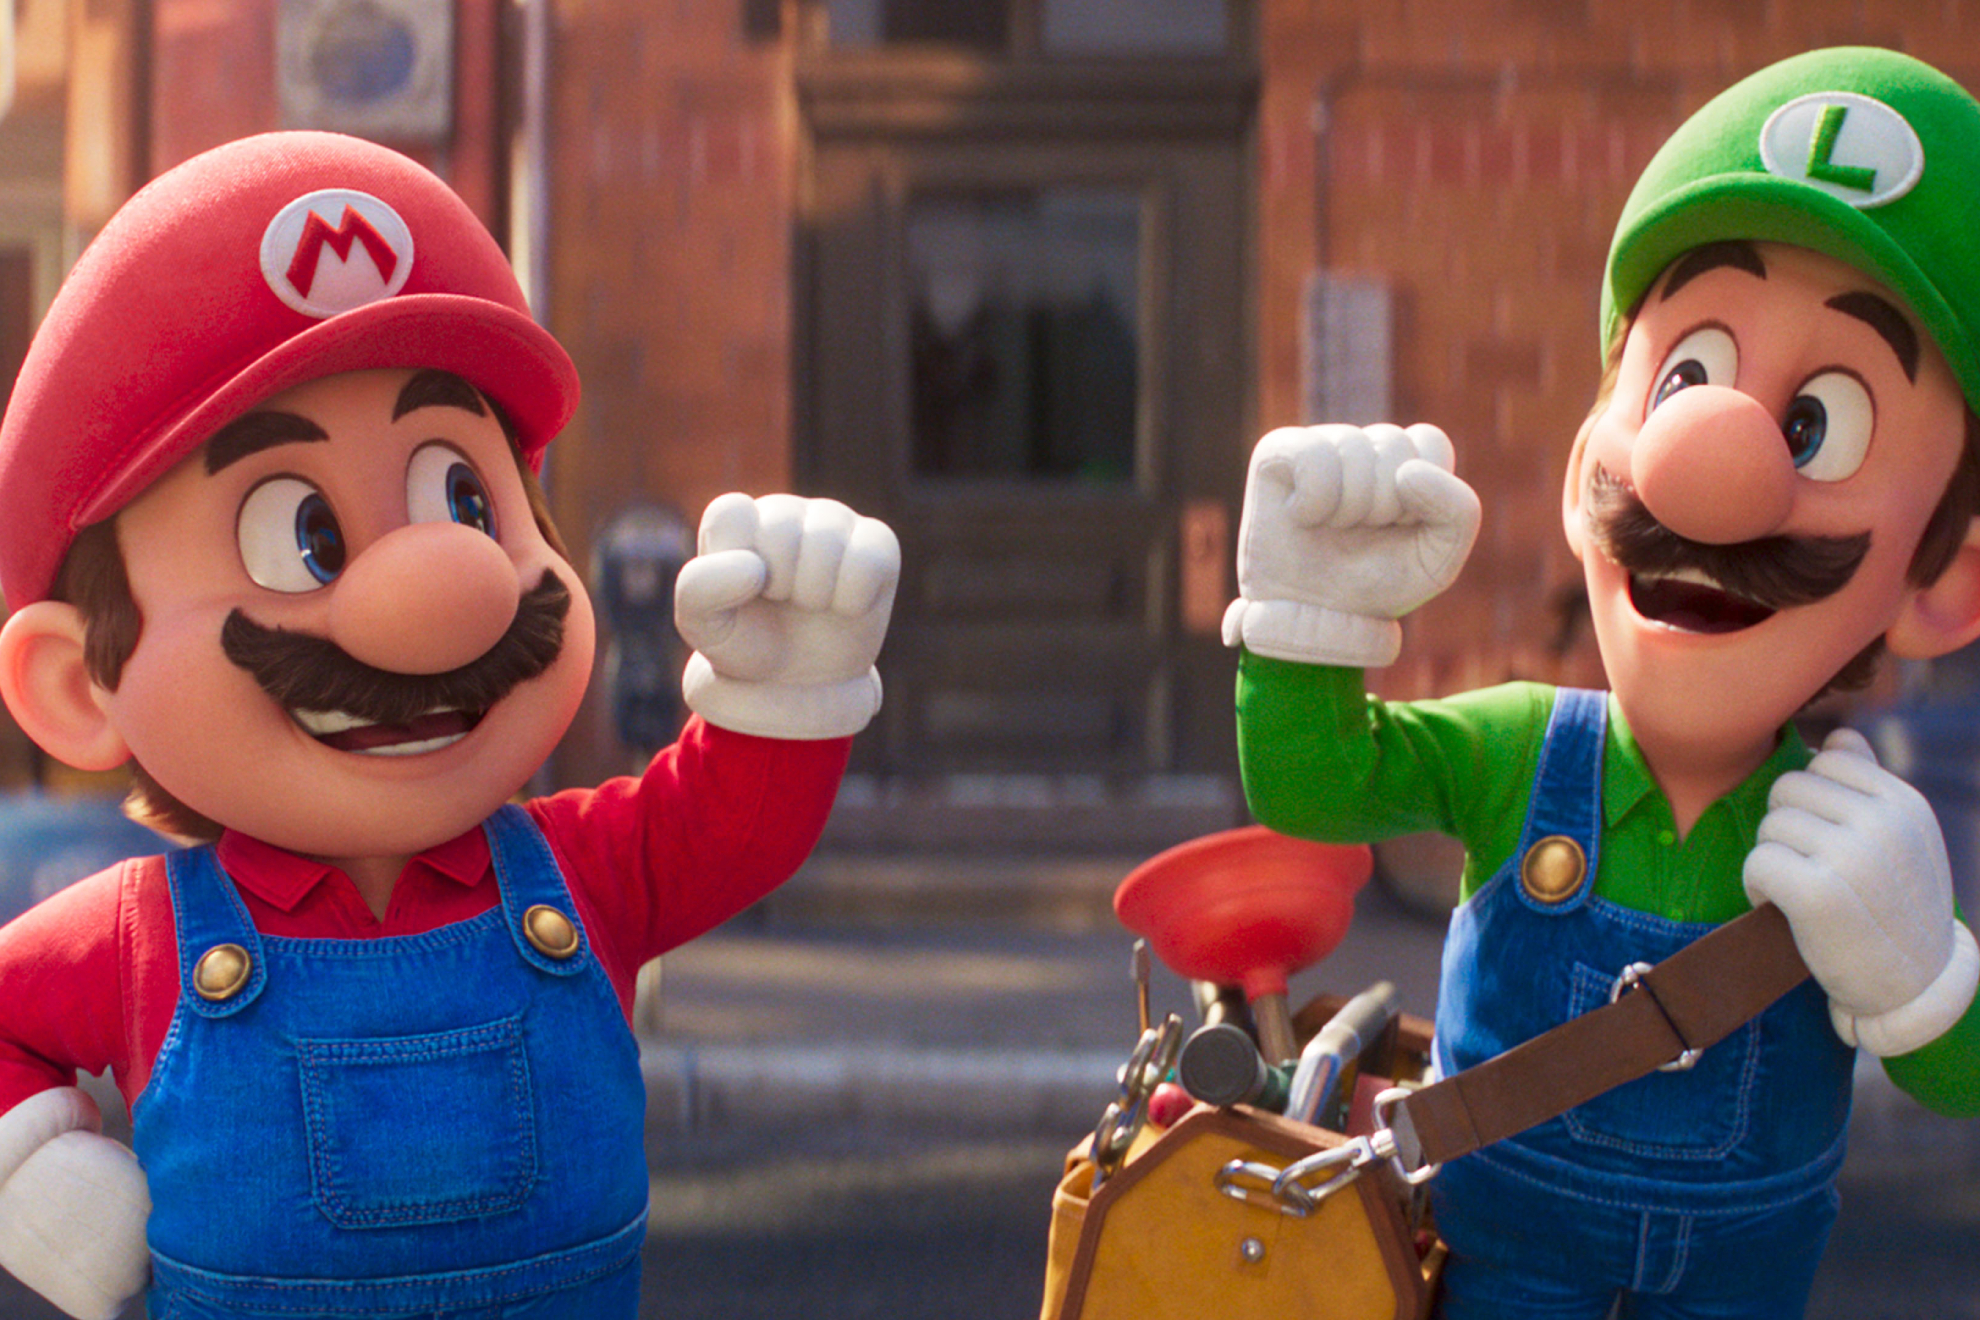 Nintendo announces Super Mario Bros 2 on MAR10 Day: When is the release date?